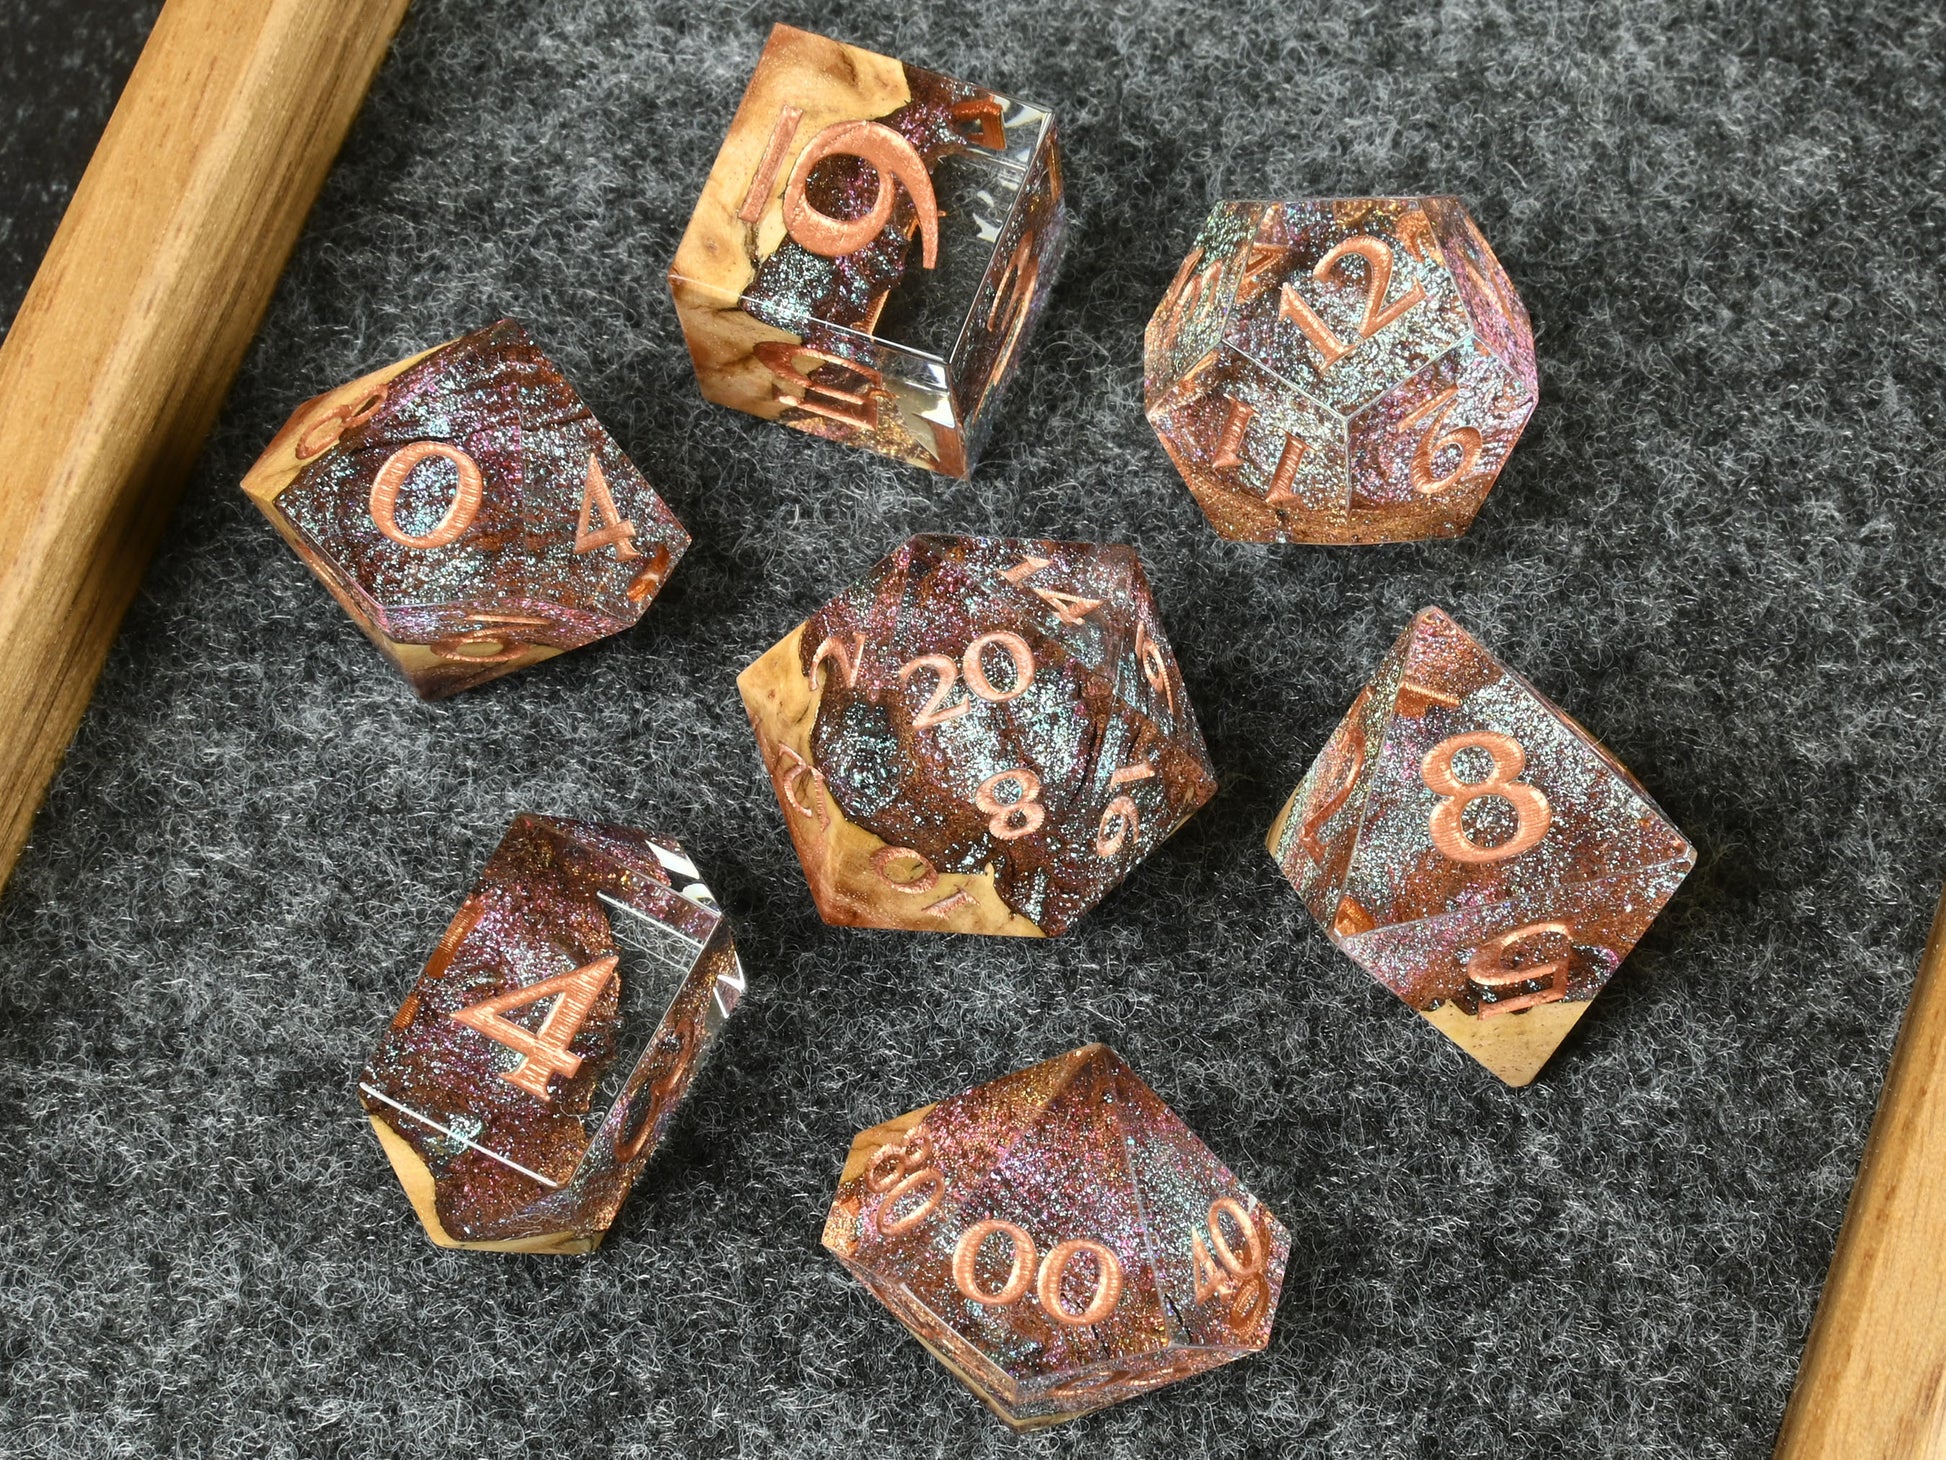 Red mallee burl hybrid wood and resin dice set for dnd rpg dungeons & dragons ttrpg